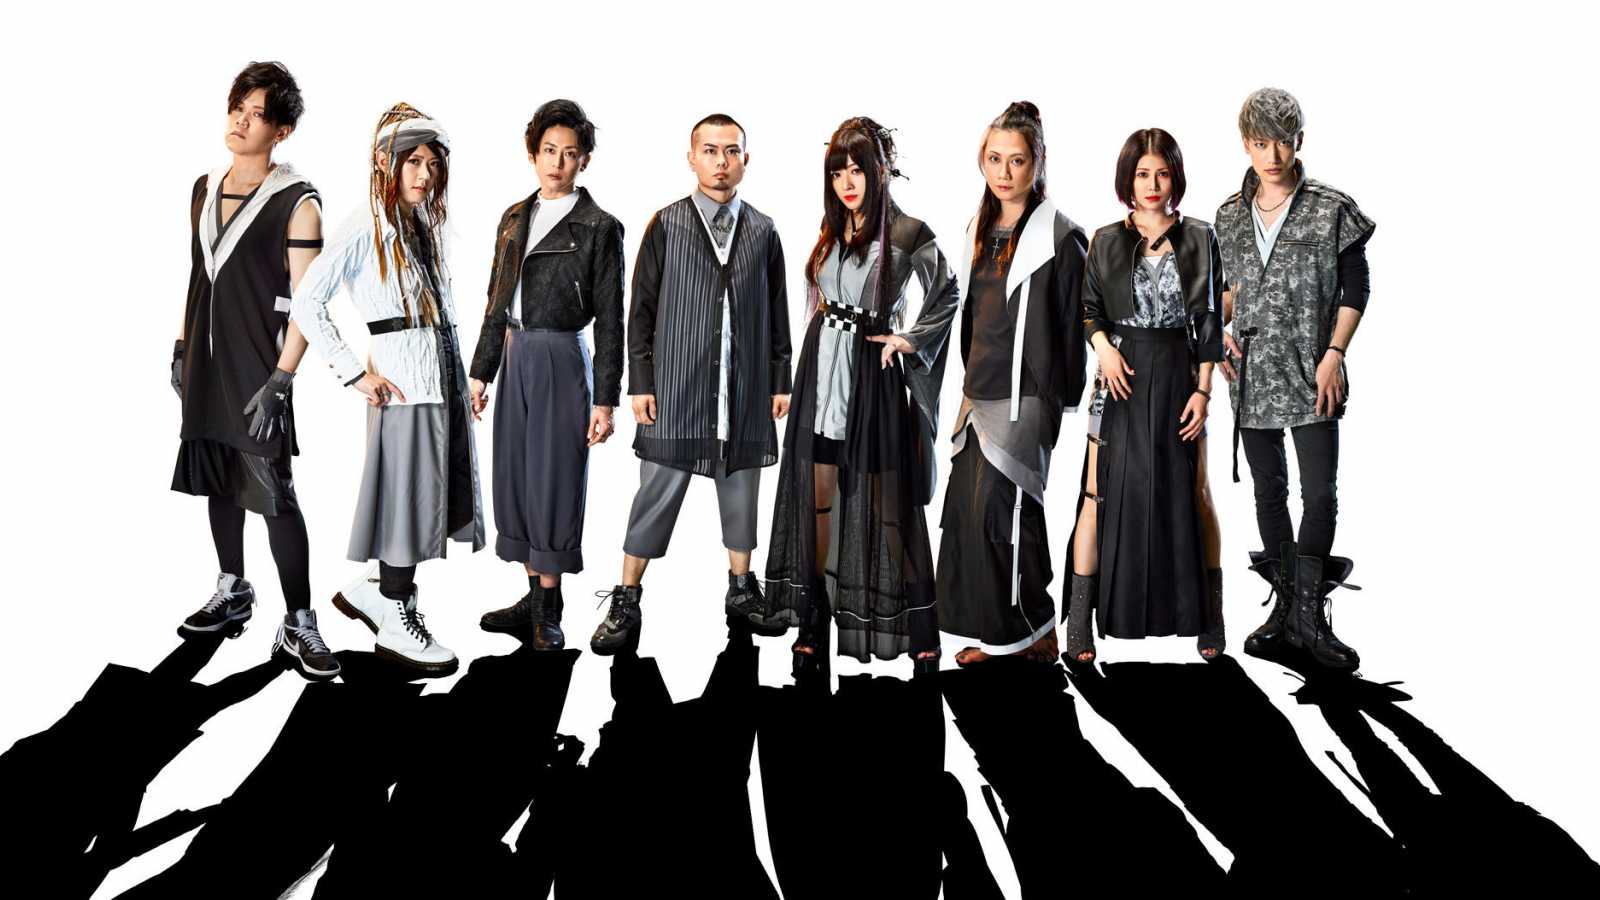 WagakkiBand dévoile le clip animé de "Aria of Life". © WagakkiBand. All rights reserved.